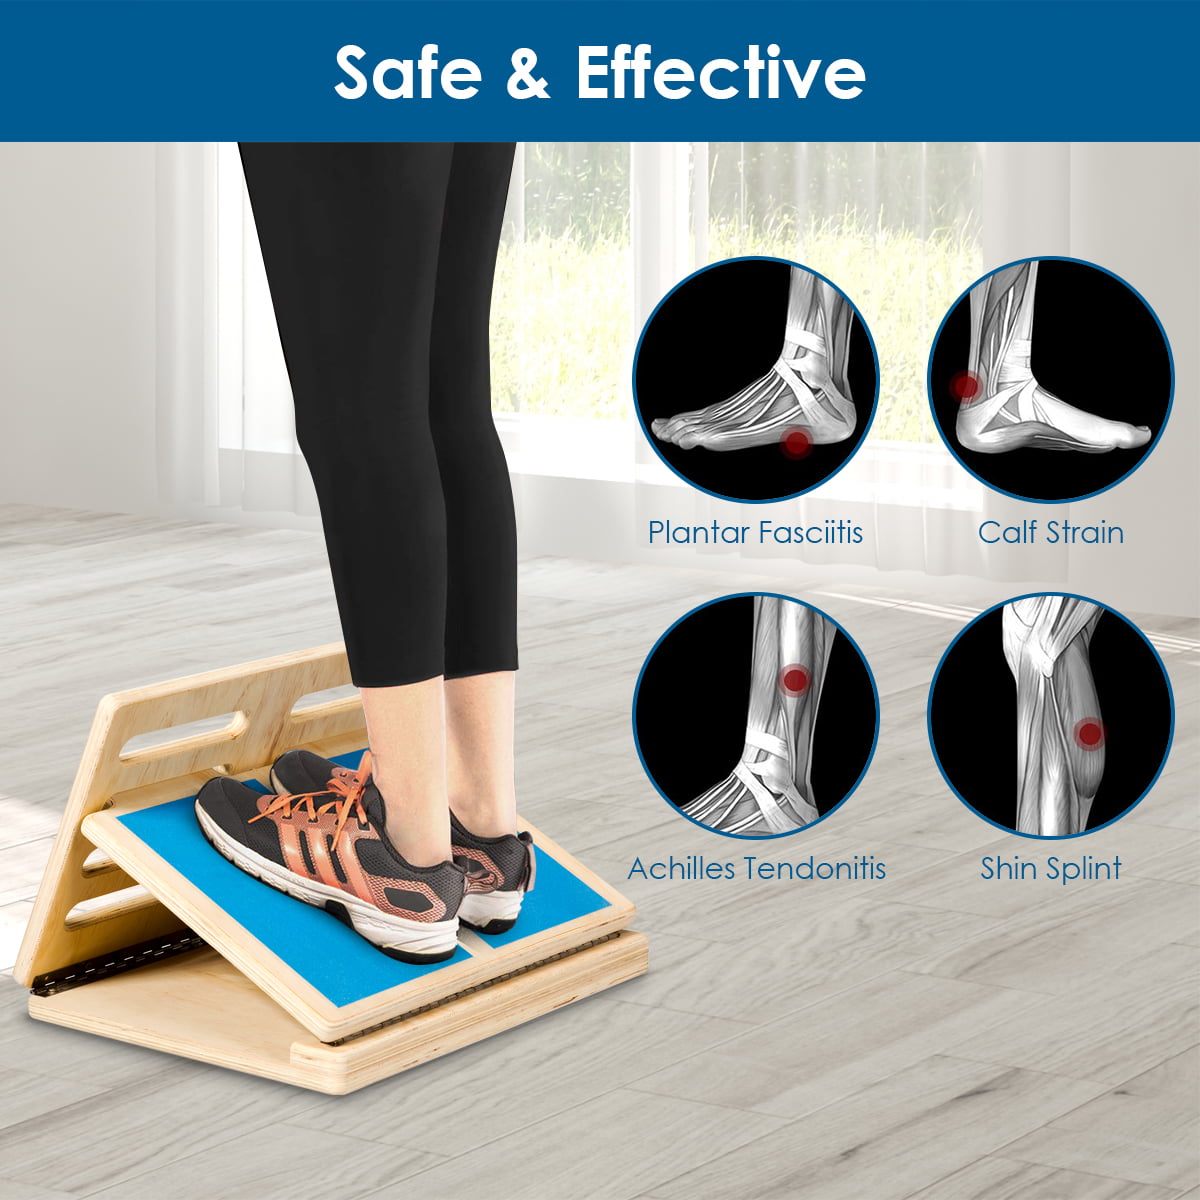 Adjustable 4 Level Upgrade Calf Stretcher Ankle and Foot Incline Board for Stretching Tight Calves or Plantar Fasciitis with Detachable Acupressure Foot Massage Mat Slant Board 350 lb Capacity 